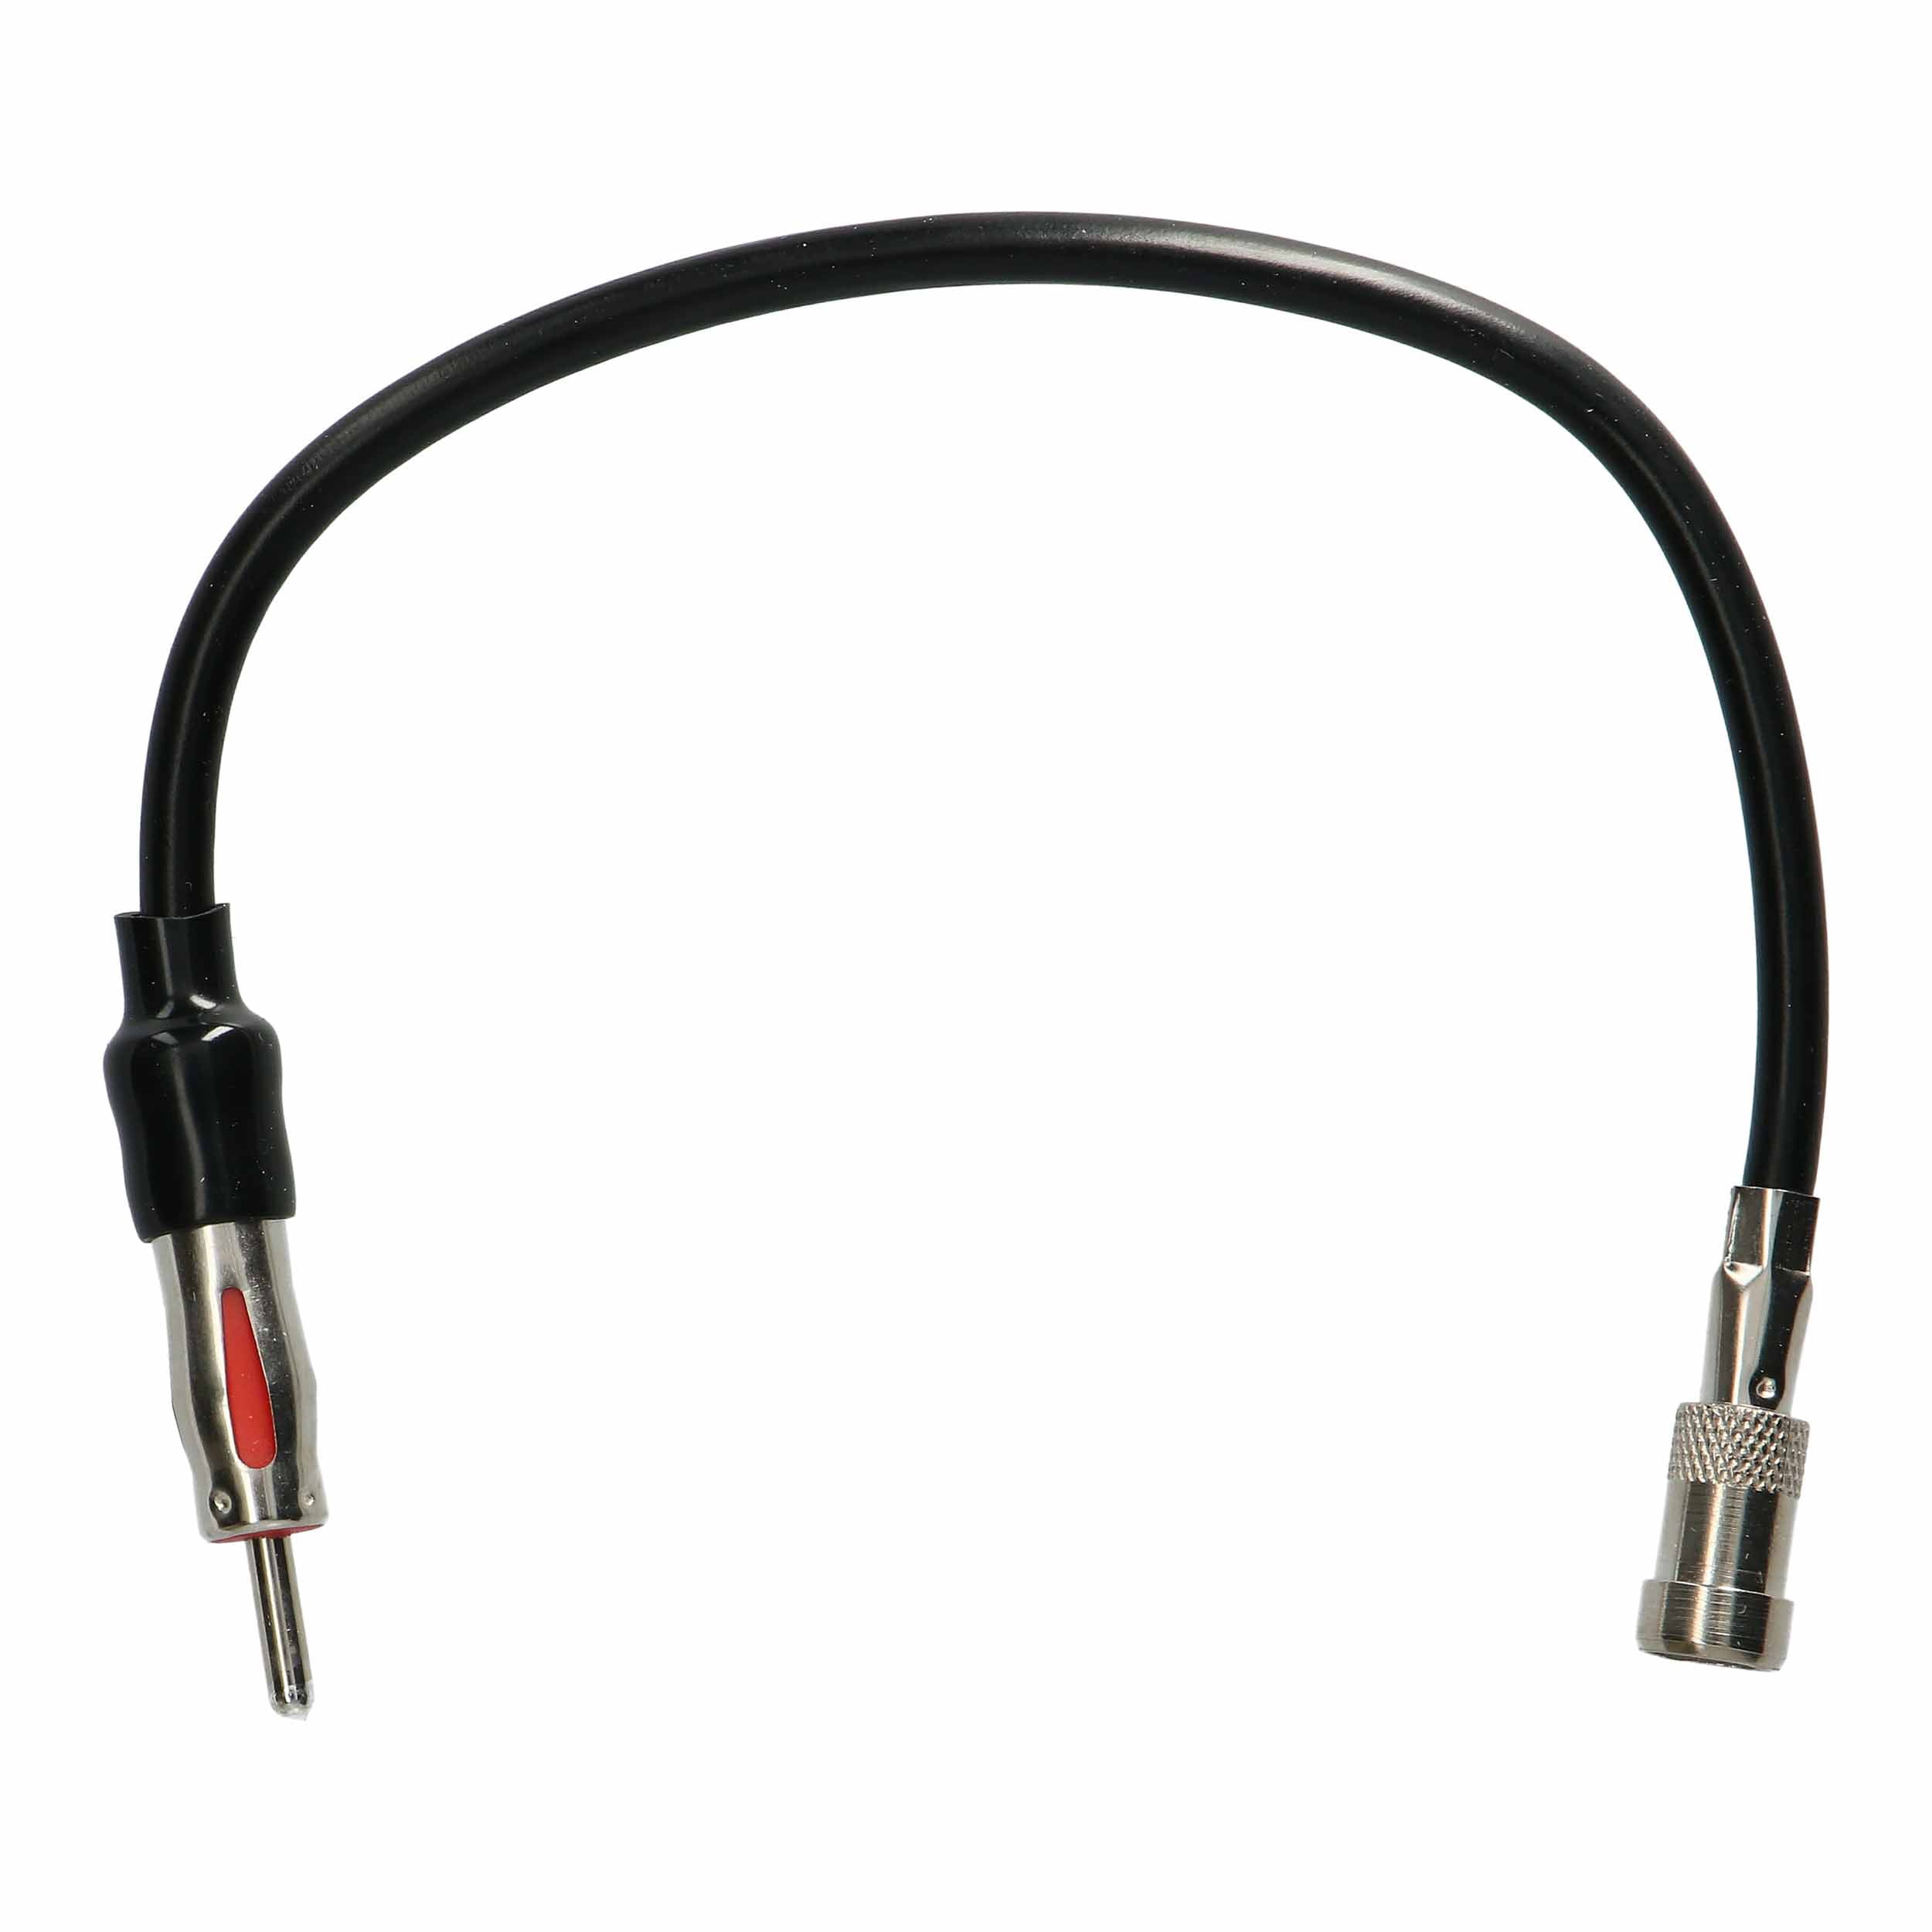 Compatible with Chevy CK Truck 1988-2000 Factory Stereo to Aftermarket Radio Antenna Adapter